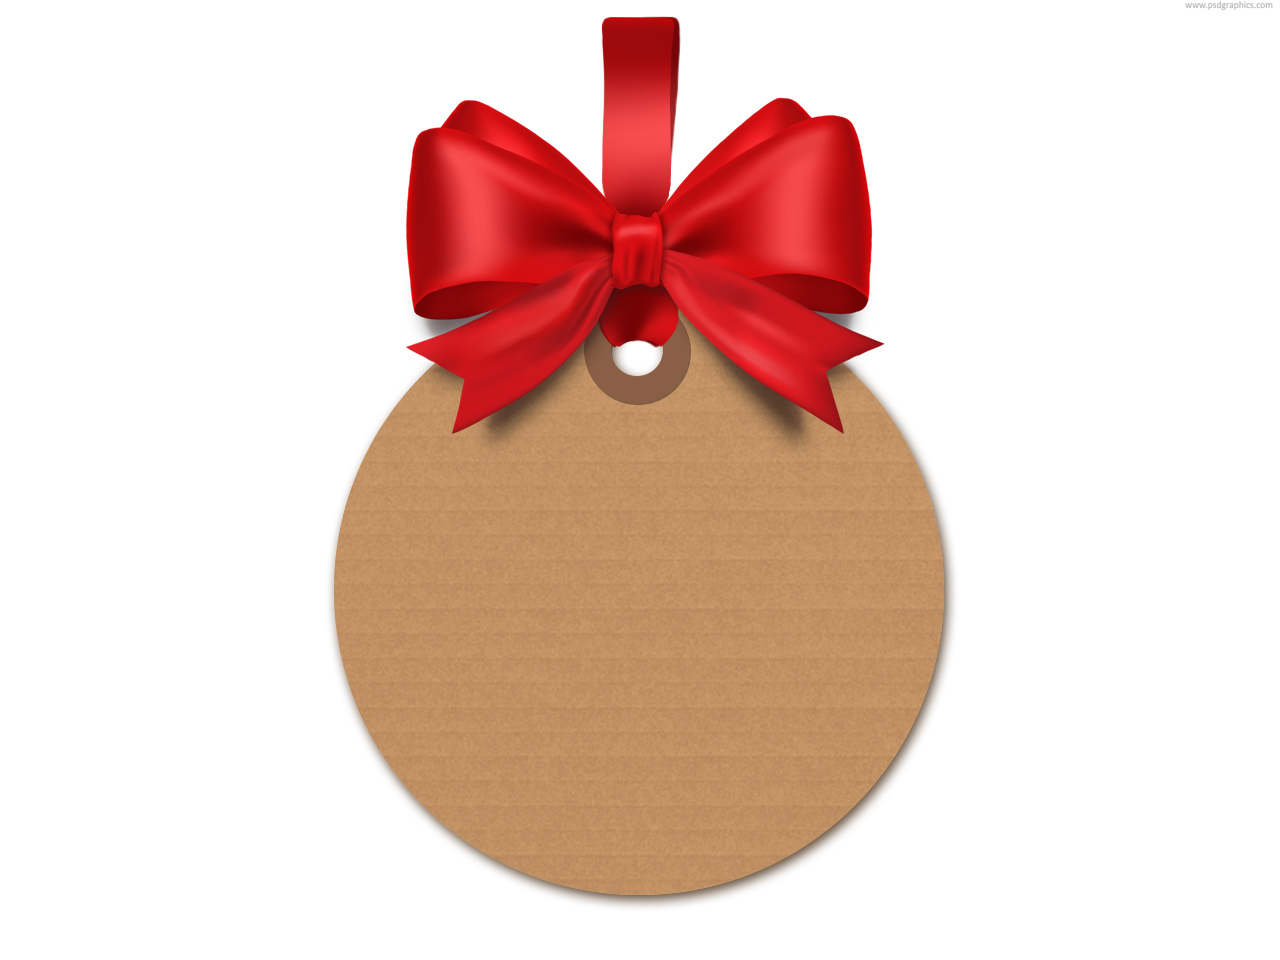 Gift Tag Png - Full Size Jpg Preview: Gift Tag Template, Transparent background PNG HD thumbnail